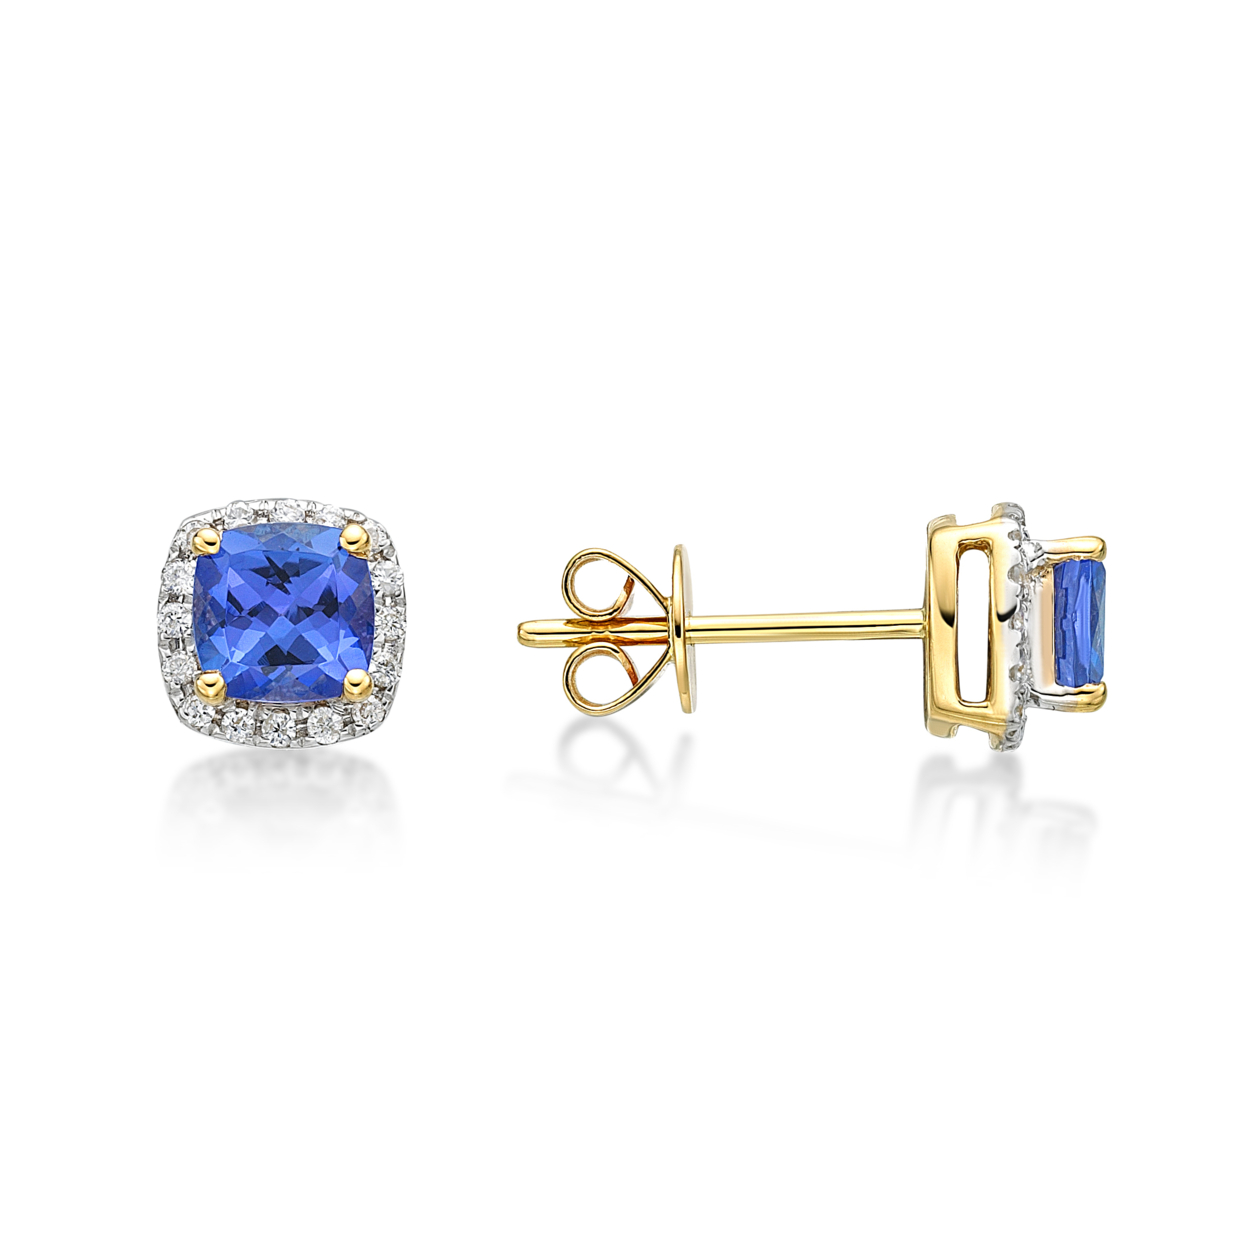 Blue Halo Studs With Detailed Sides In Gold Plating Earrings